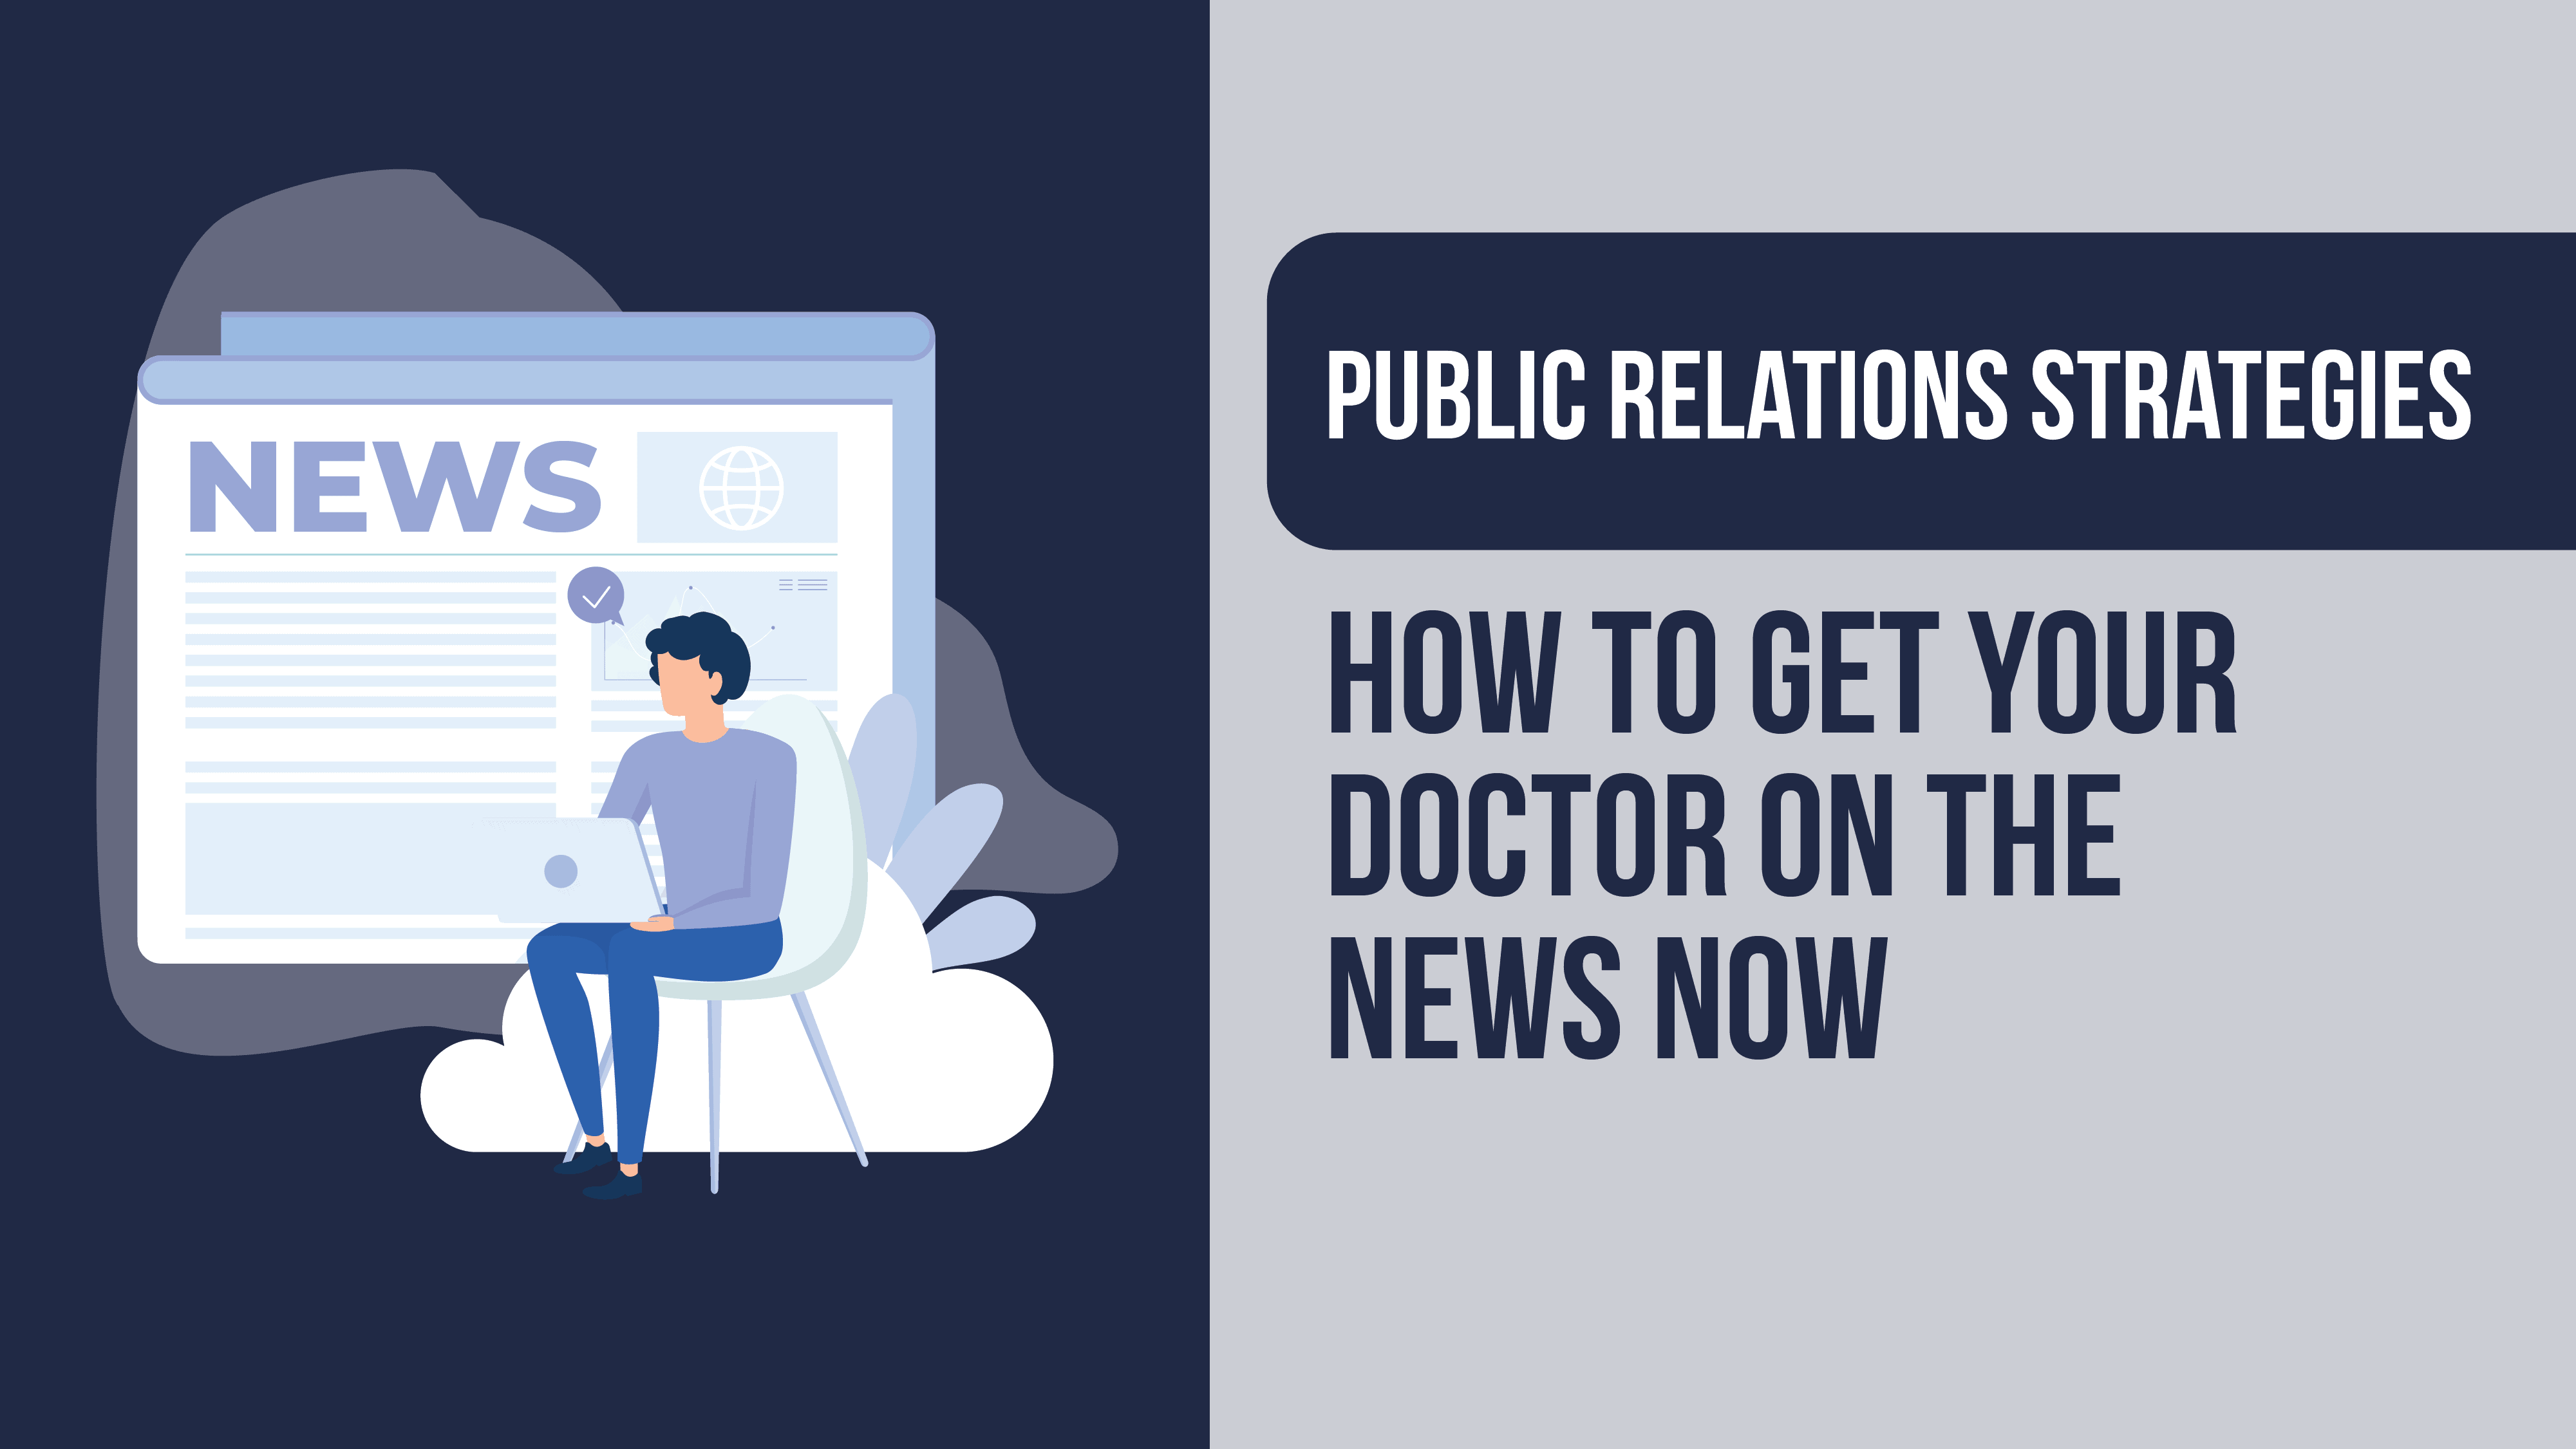 Public Relations Strategies: How to Get Your Doctor on the News Now